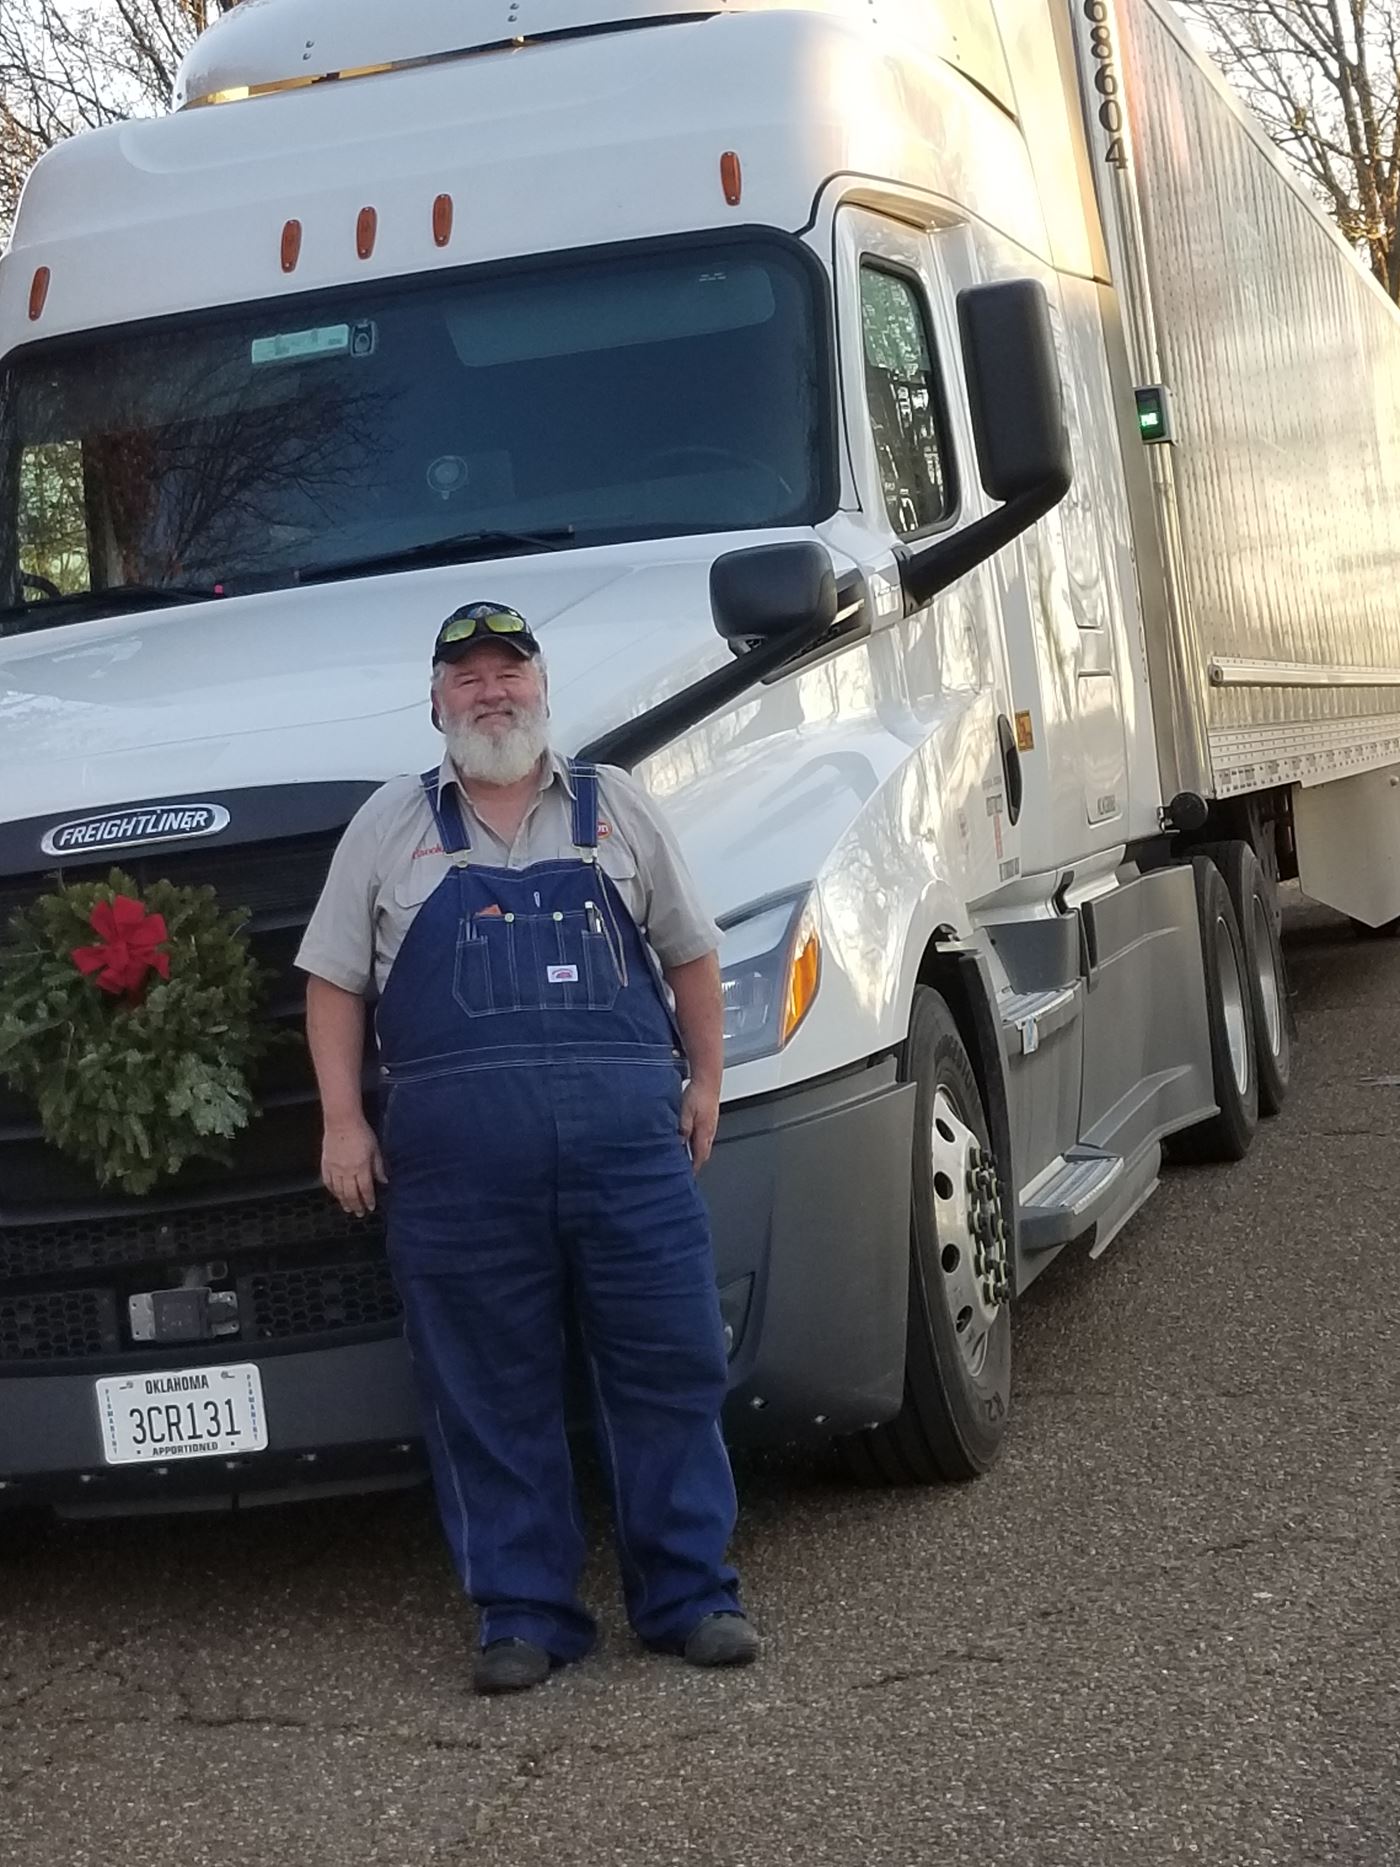 Brooks Evans is one of the many tuckers who offer their time to deliver wreaths to the various locations associated with Wreaths Across America.